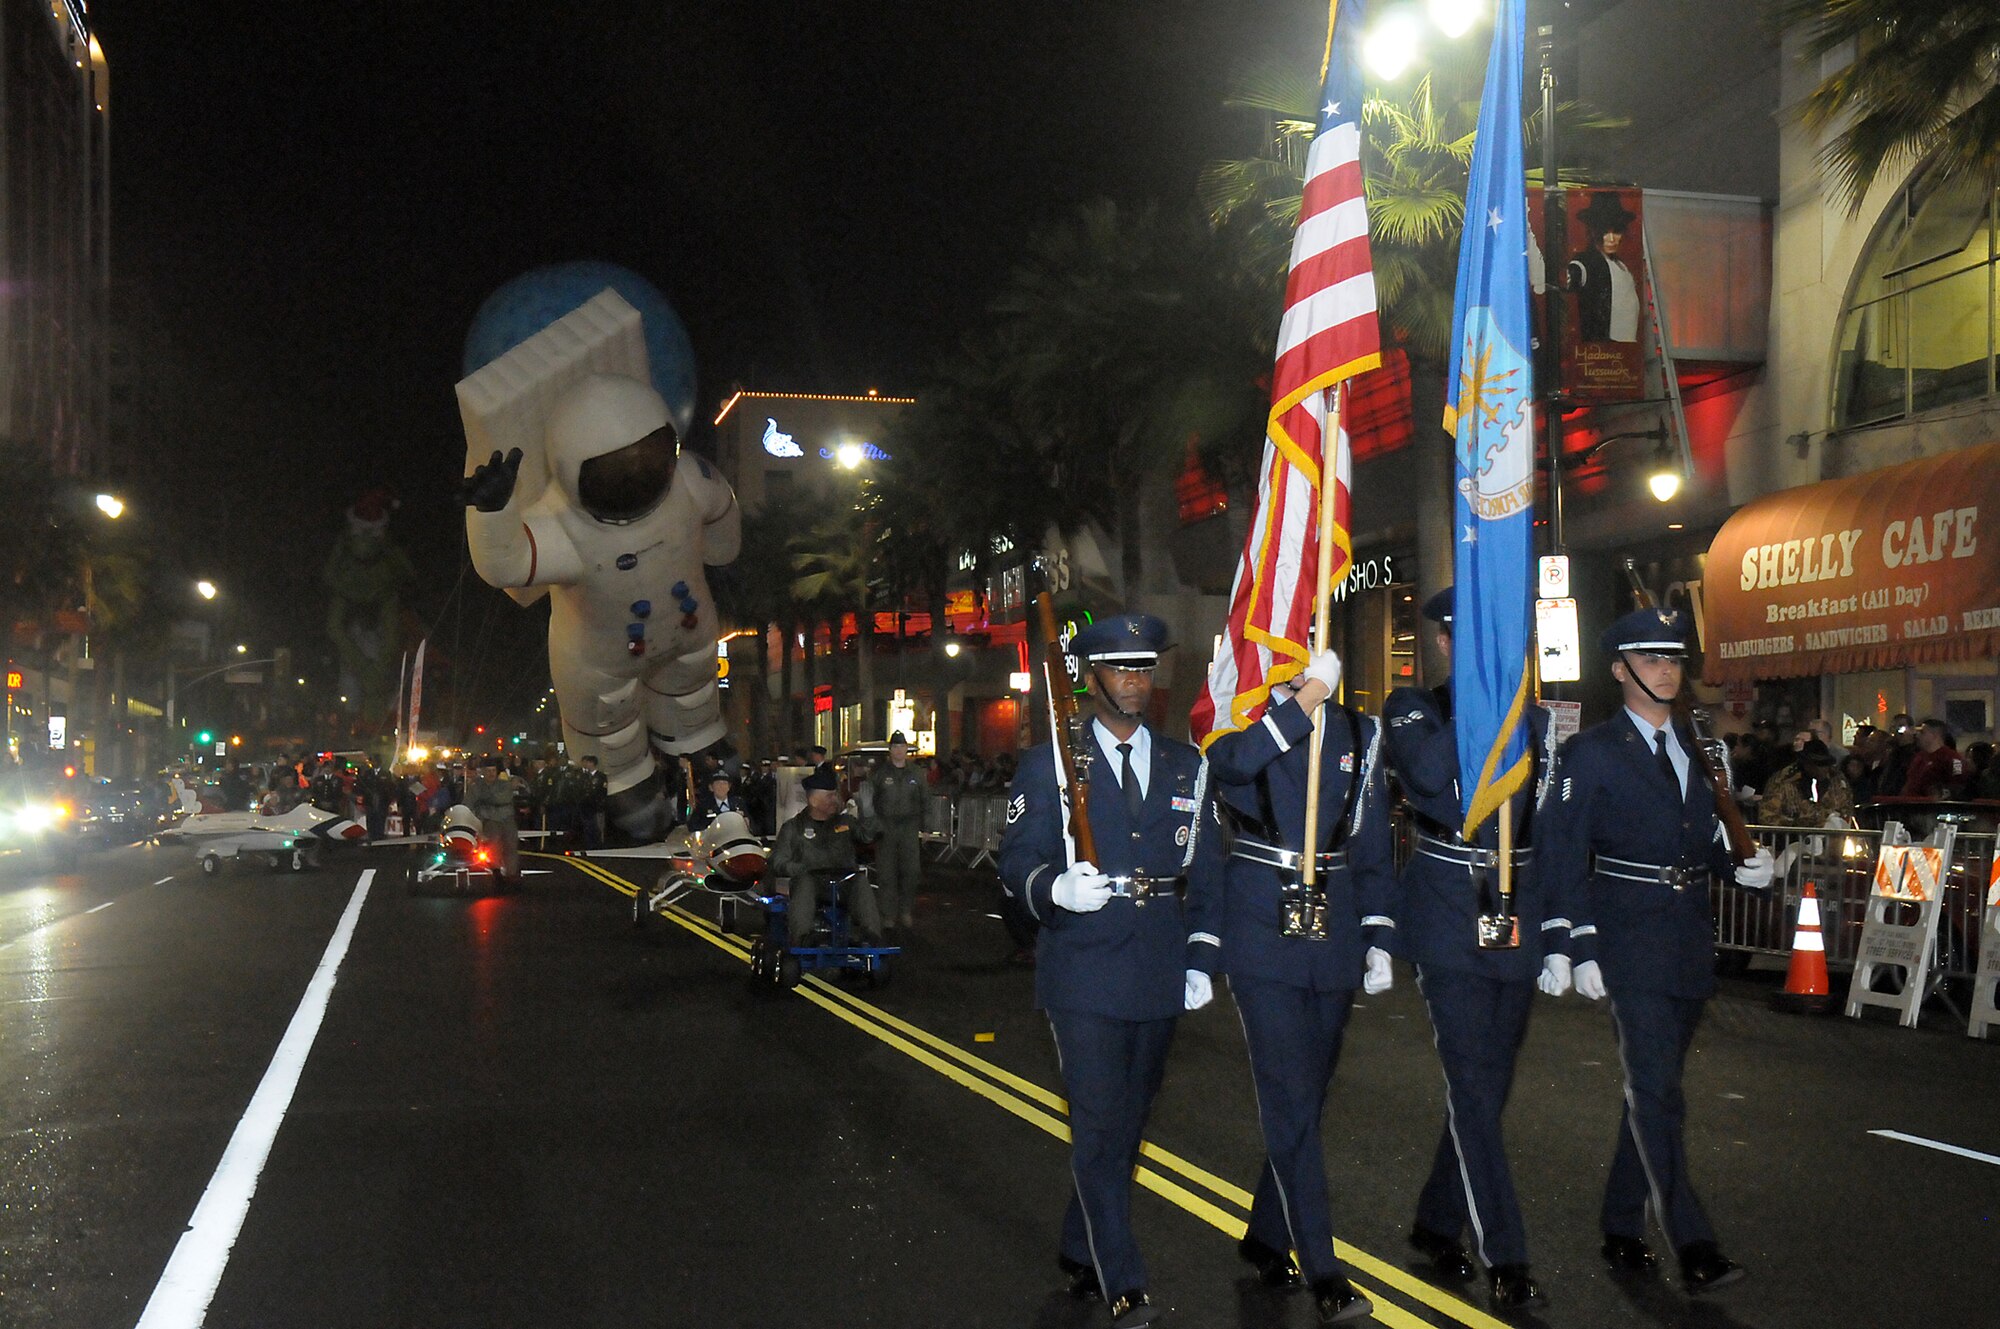 An Air Force honor guard from March Reserve Base heads up the Air Force members participating in the 81st annual Hollywood Christmas Parade, Nov. 25. (Photo by Joe Juarez)